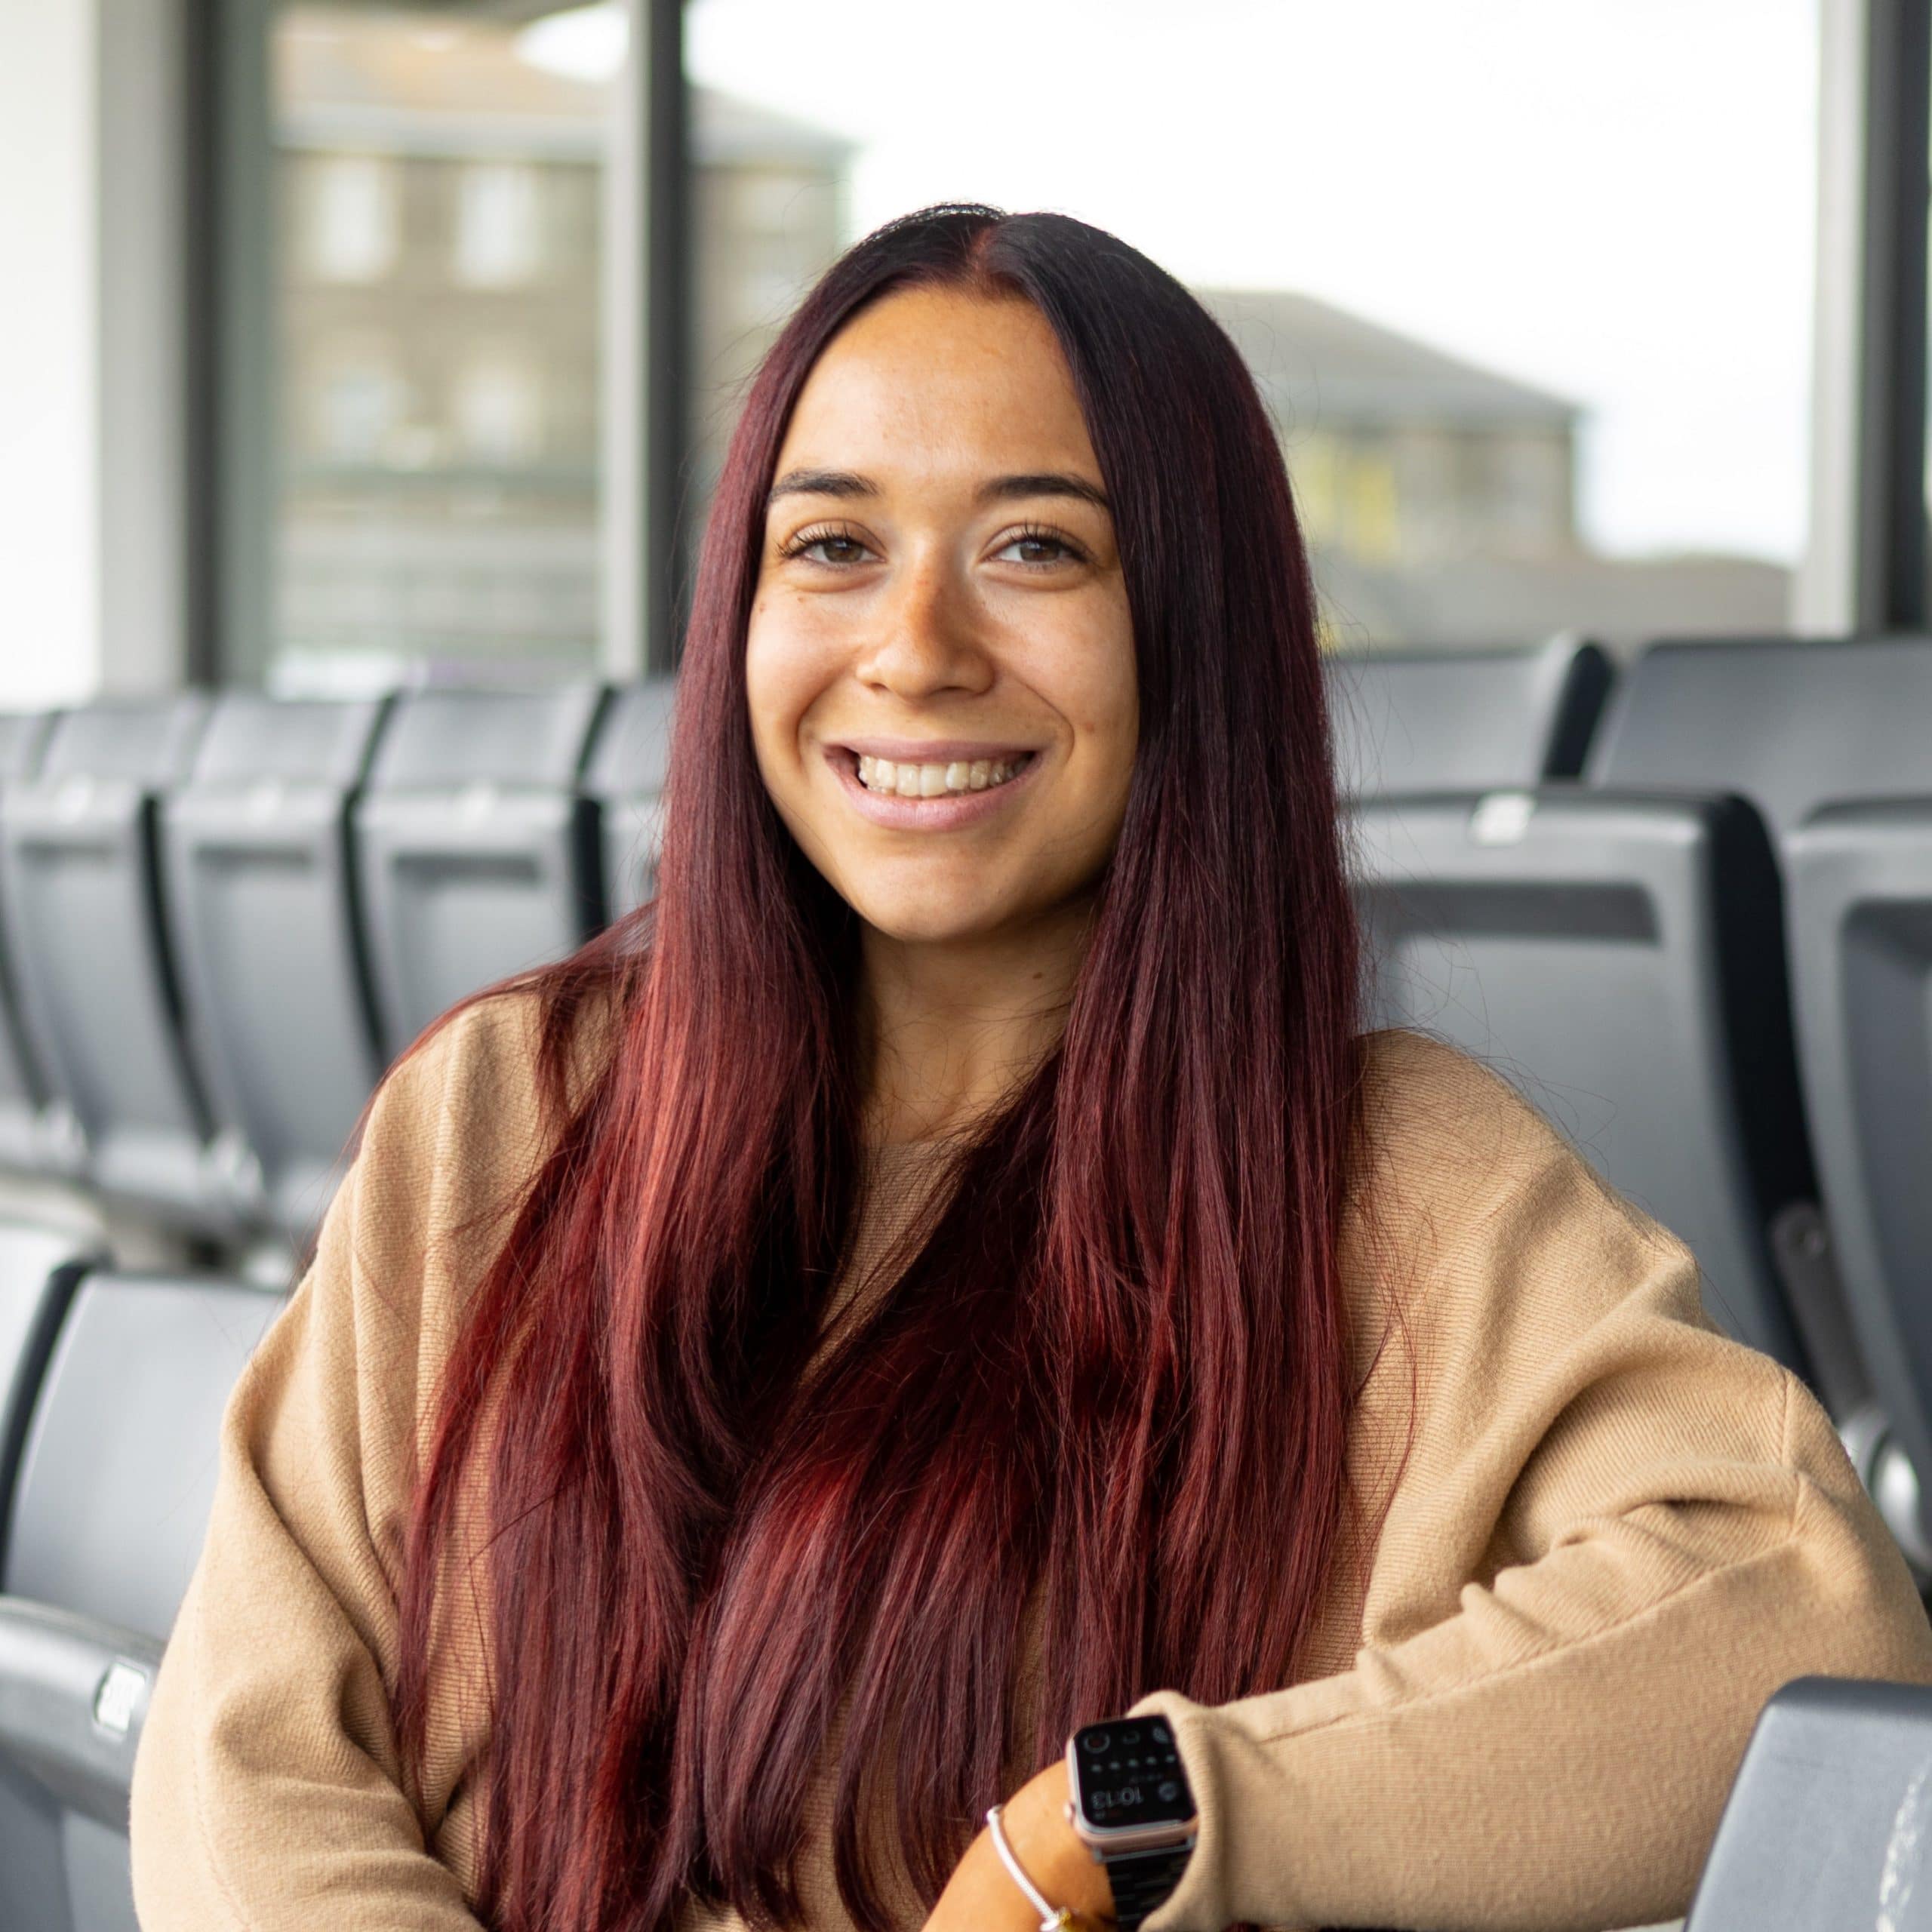 A feminine person with very long maroon coloured hair, tanned skin, wearing a light brown jumper and an apple watch.